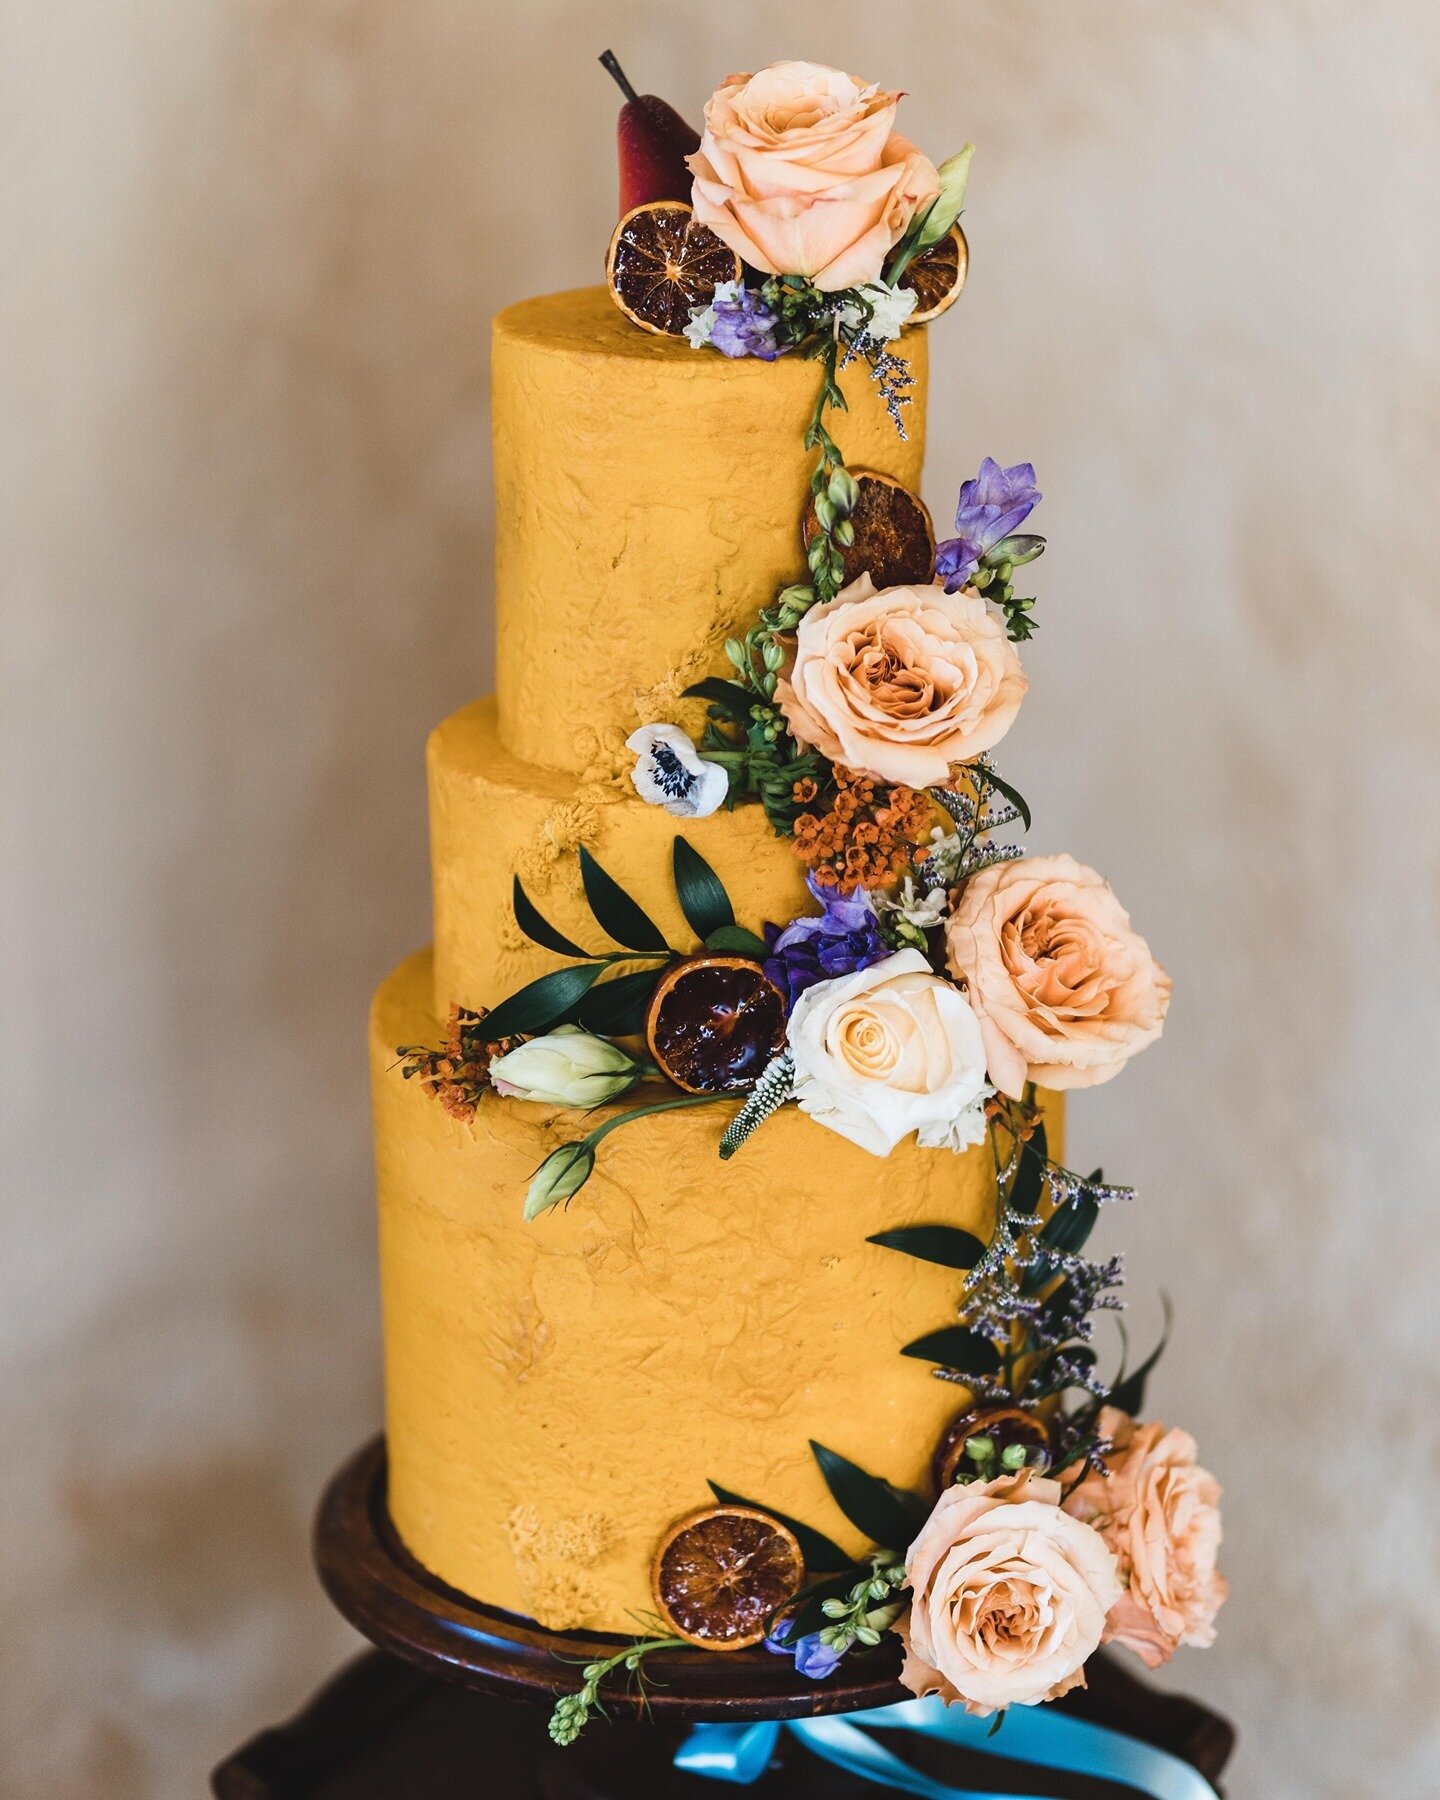 Your cake should be a focal point. Check out this STUNNER by @lepetitsweet!